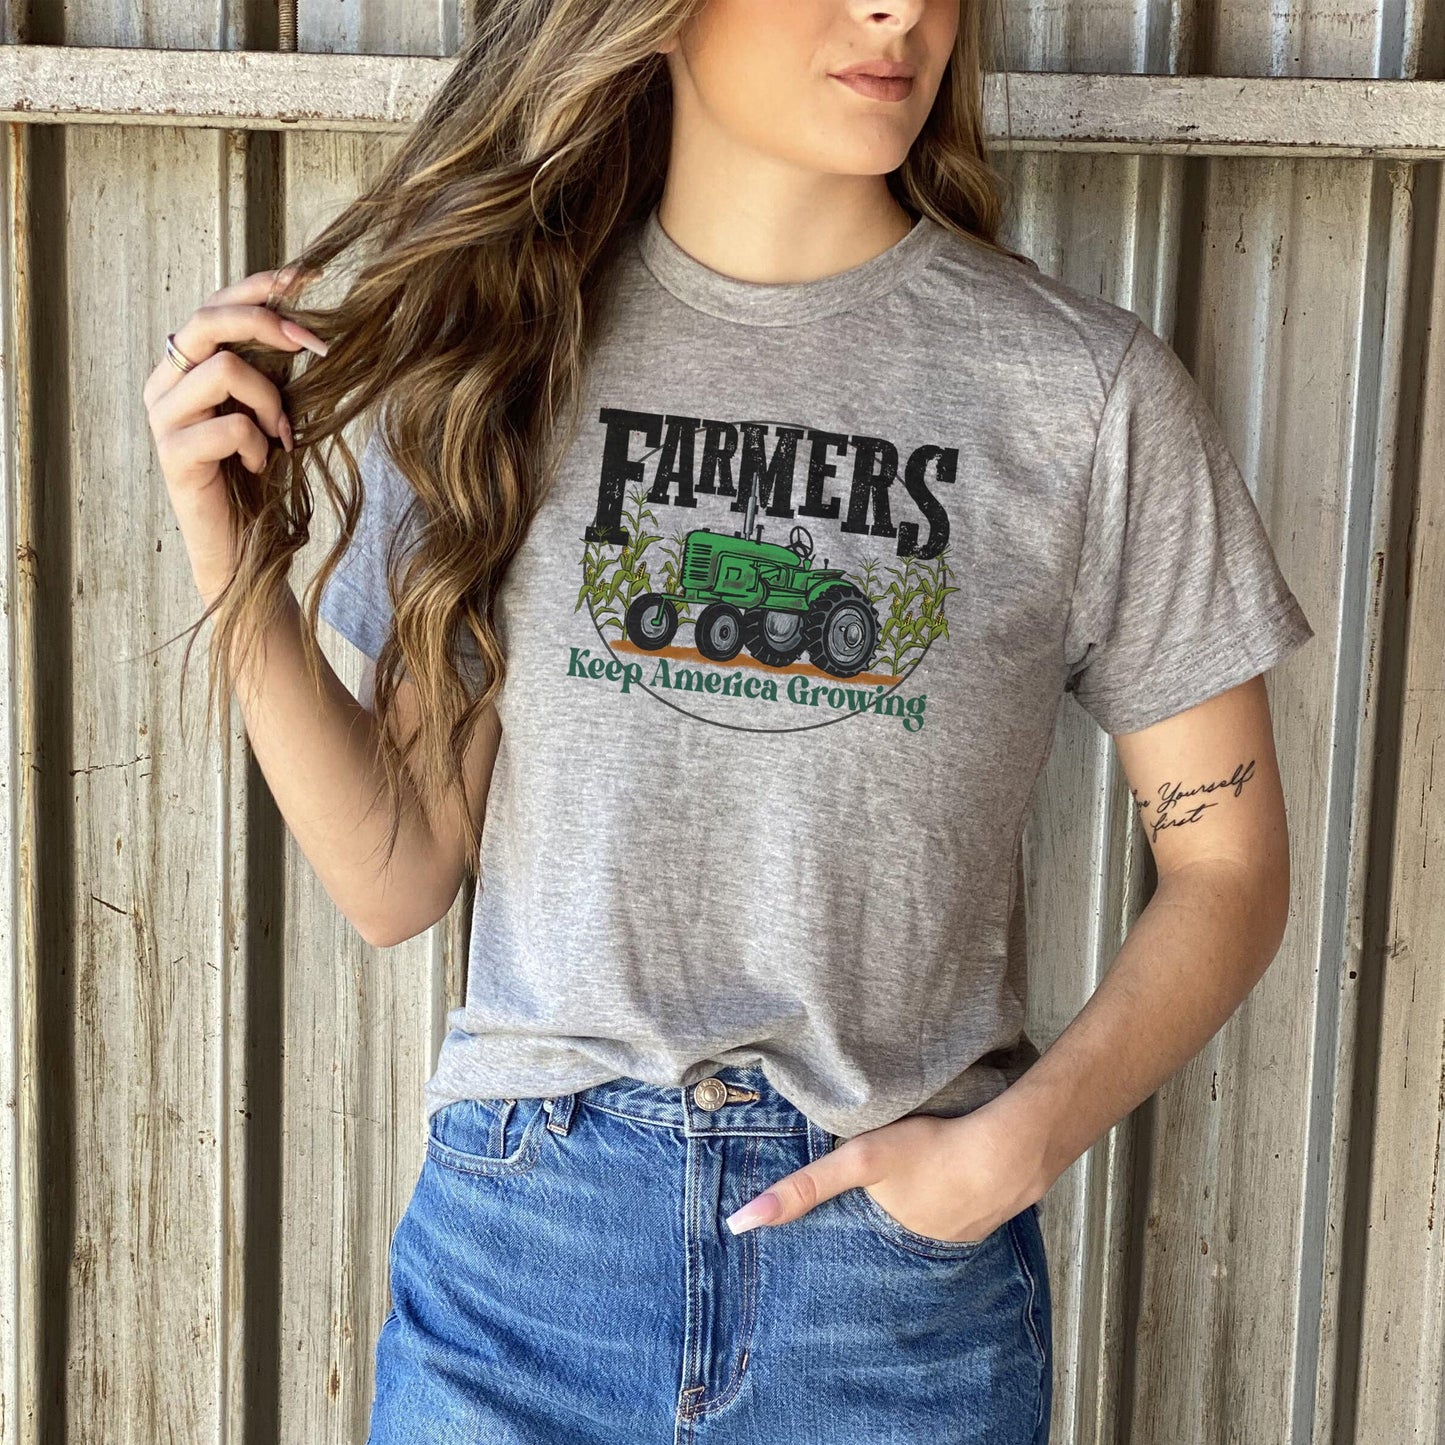 ADULT SIZE "Farmers Keep America Growing" Grey T-shirt with Green Tractor